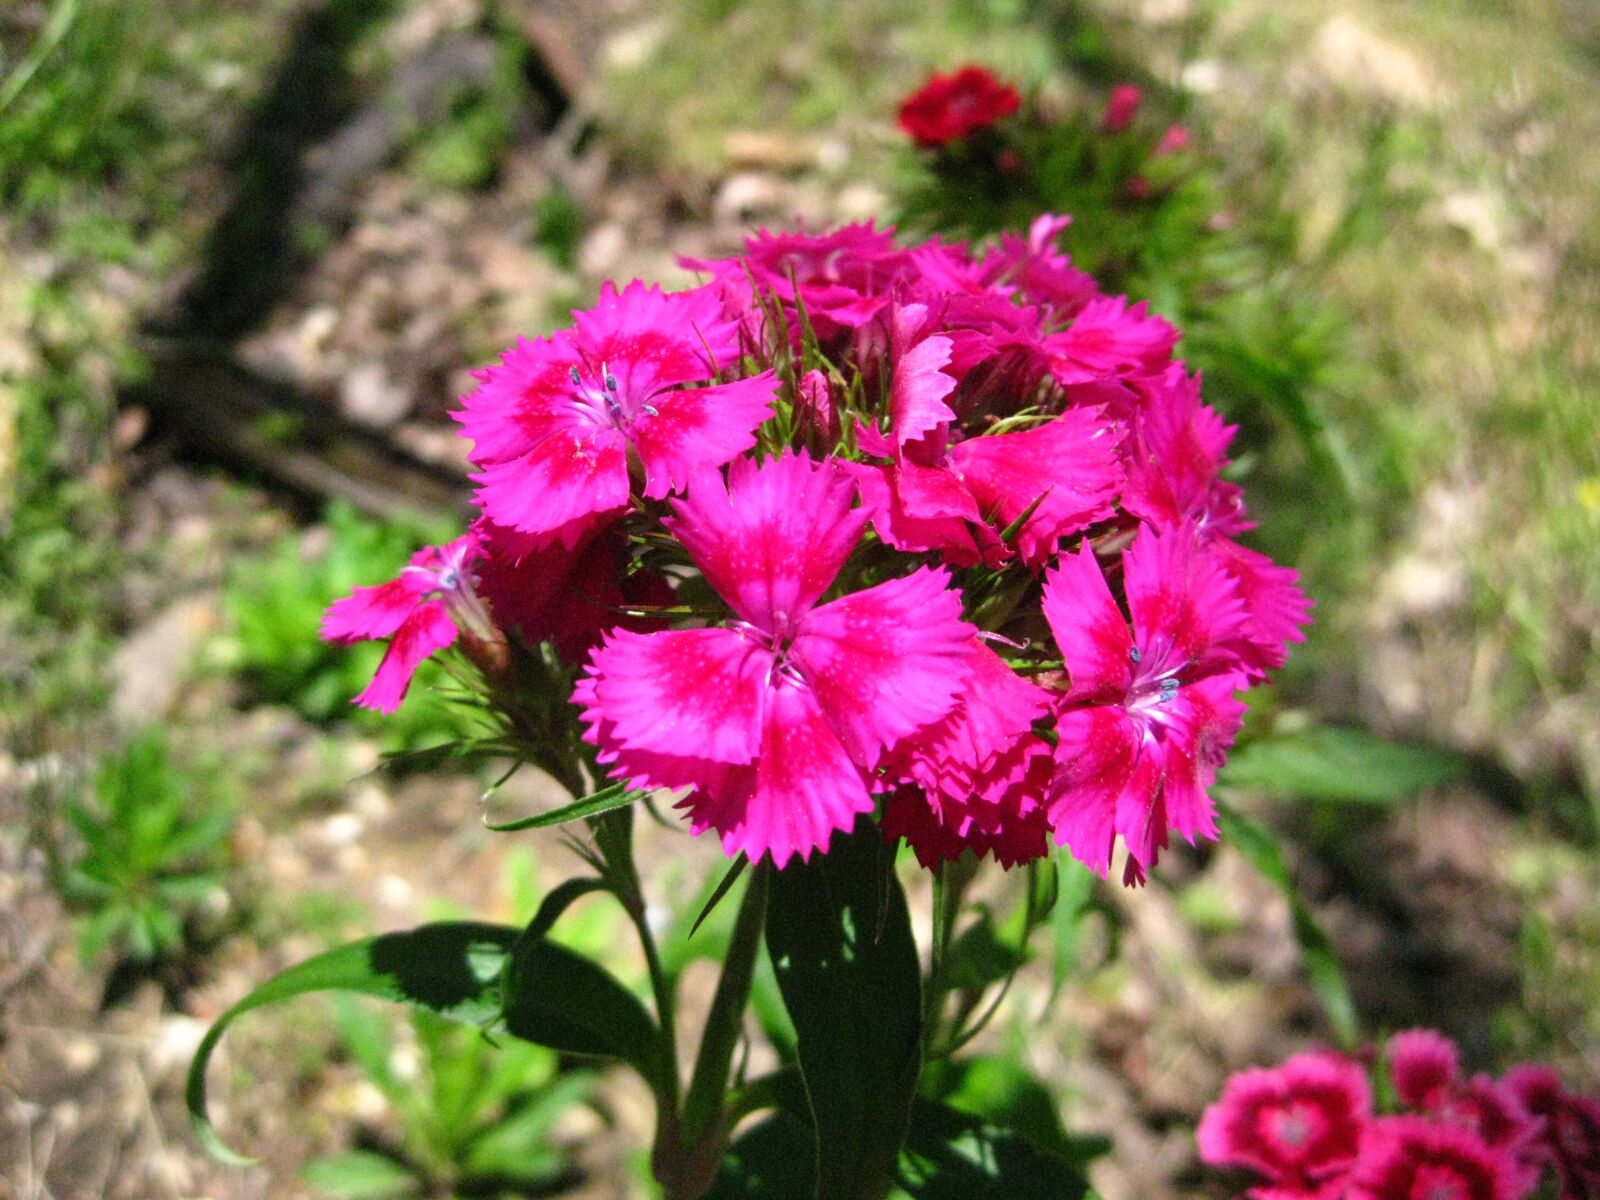 Canon PowerShot SD1100 IS (Digital IXUS 80 IS / IXY Digital 20 IS) sample photo. Dianthus, petals, blossoms photography